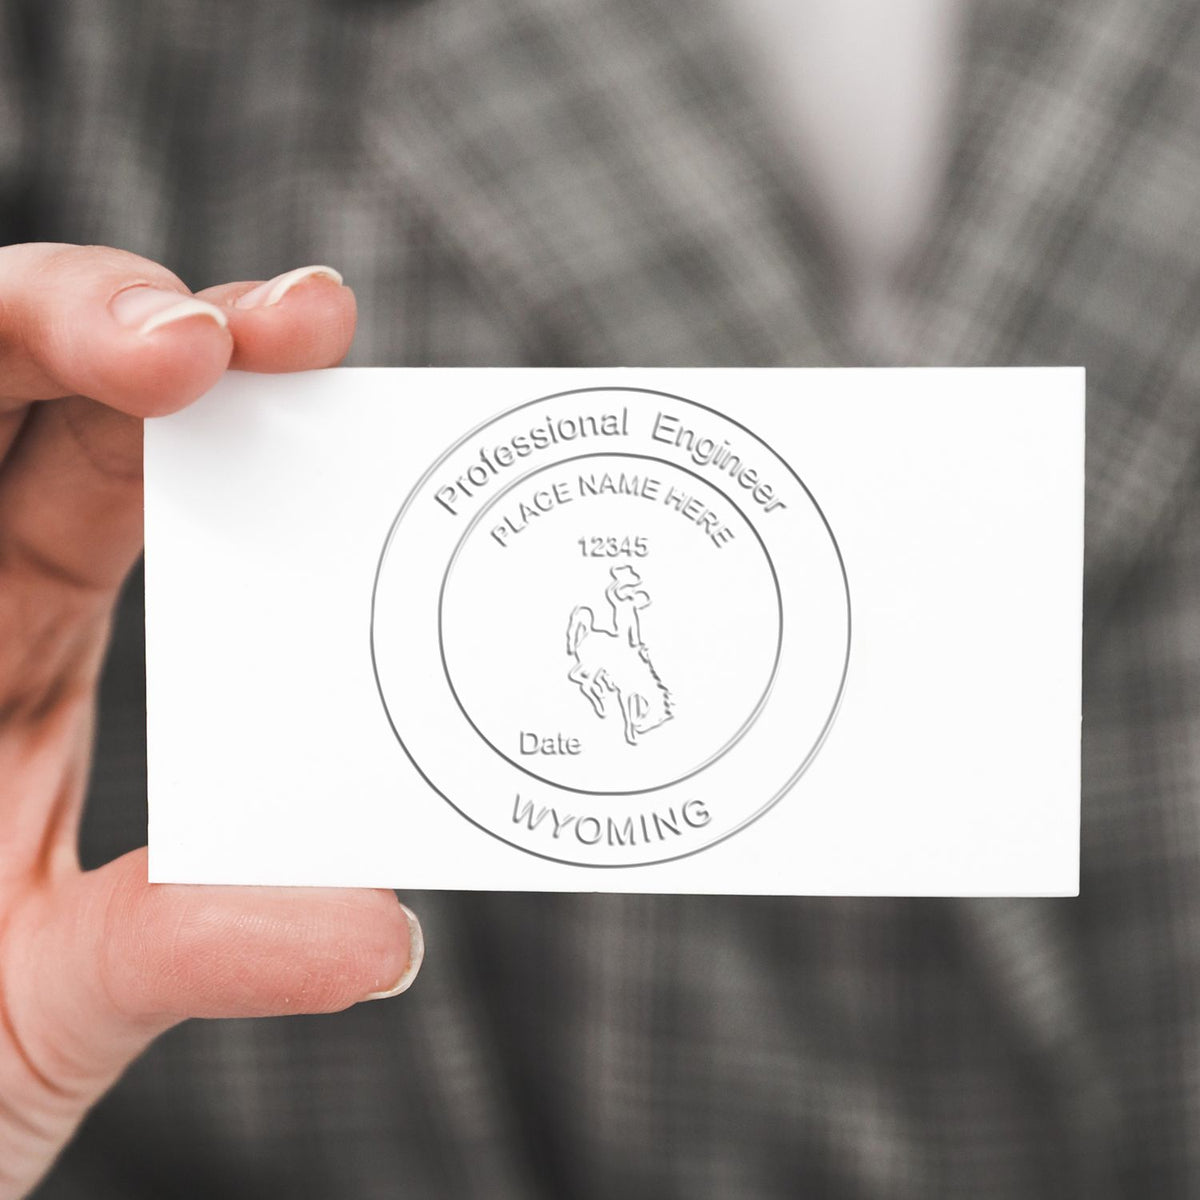 This paper is stamped with a sample imprint of the Wyoming Engineer Desk Seal, signifying its quality and reliability.